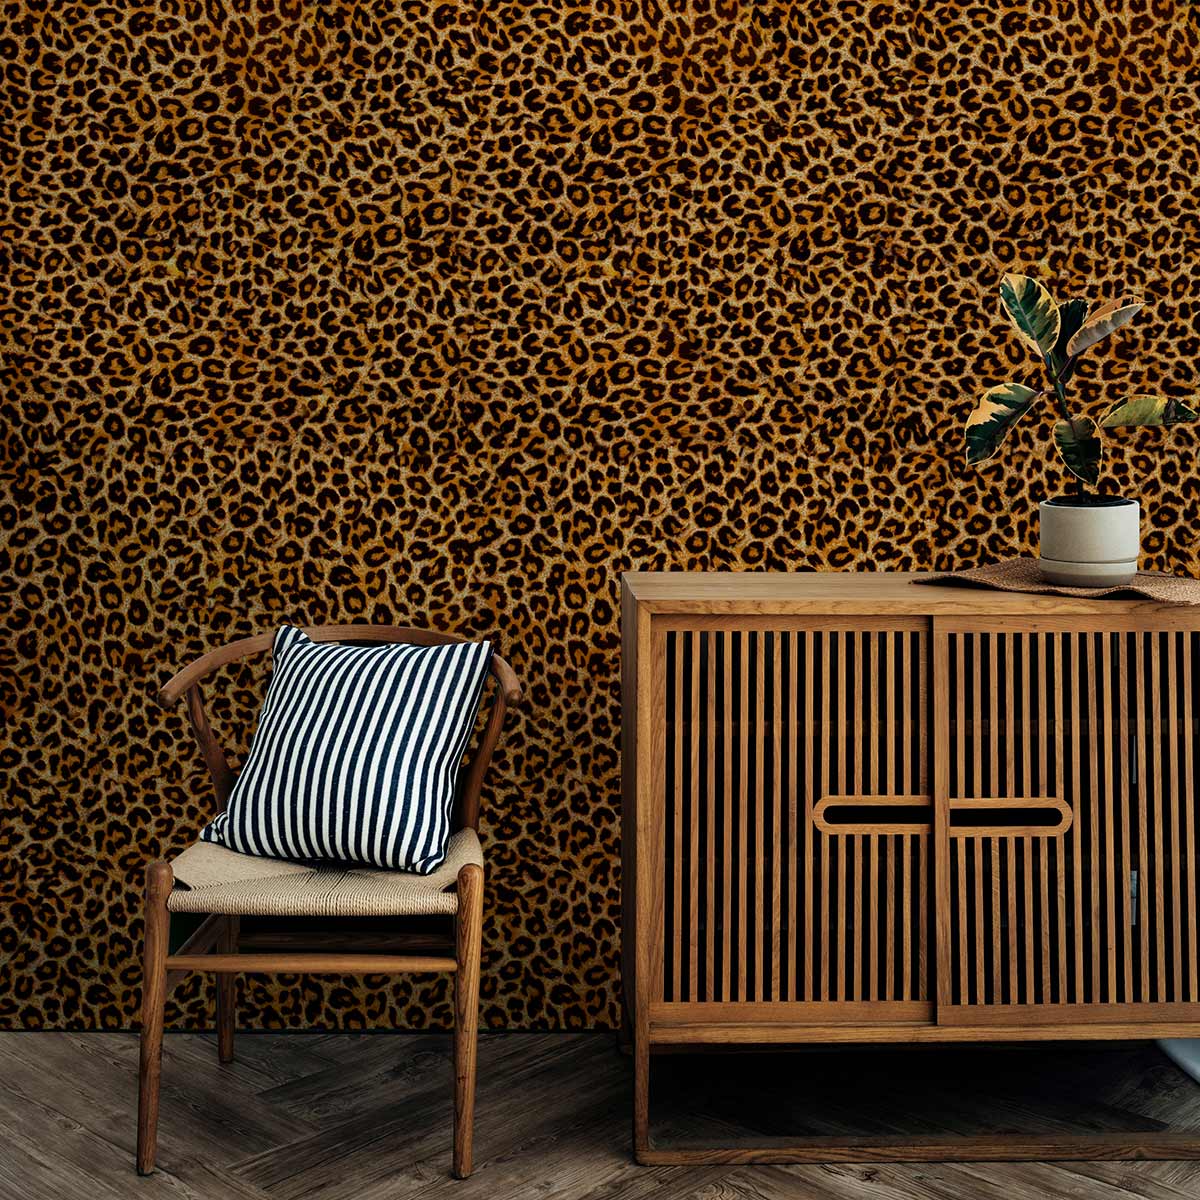 The hallway will have a textural wallpaper mural with a luxurious leopard print.